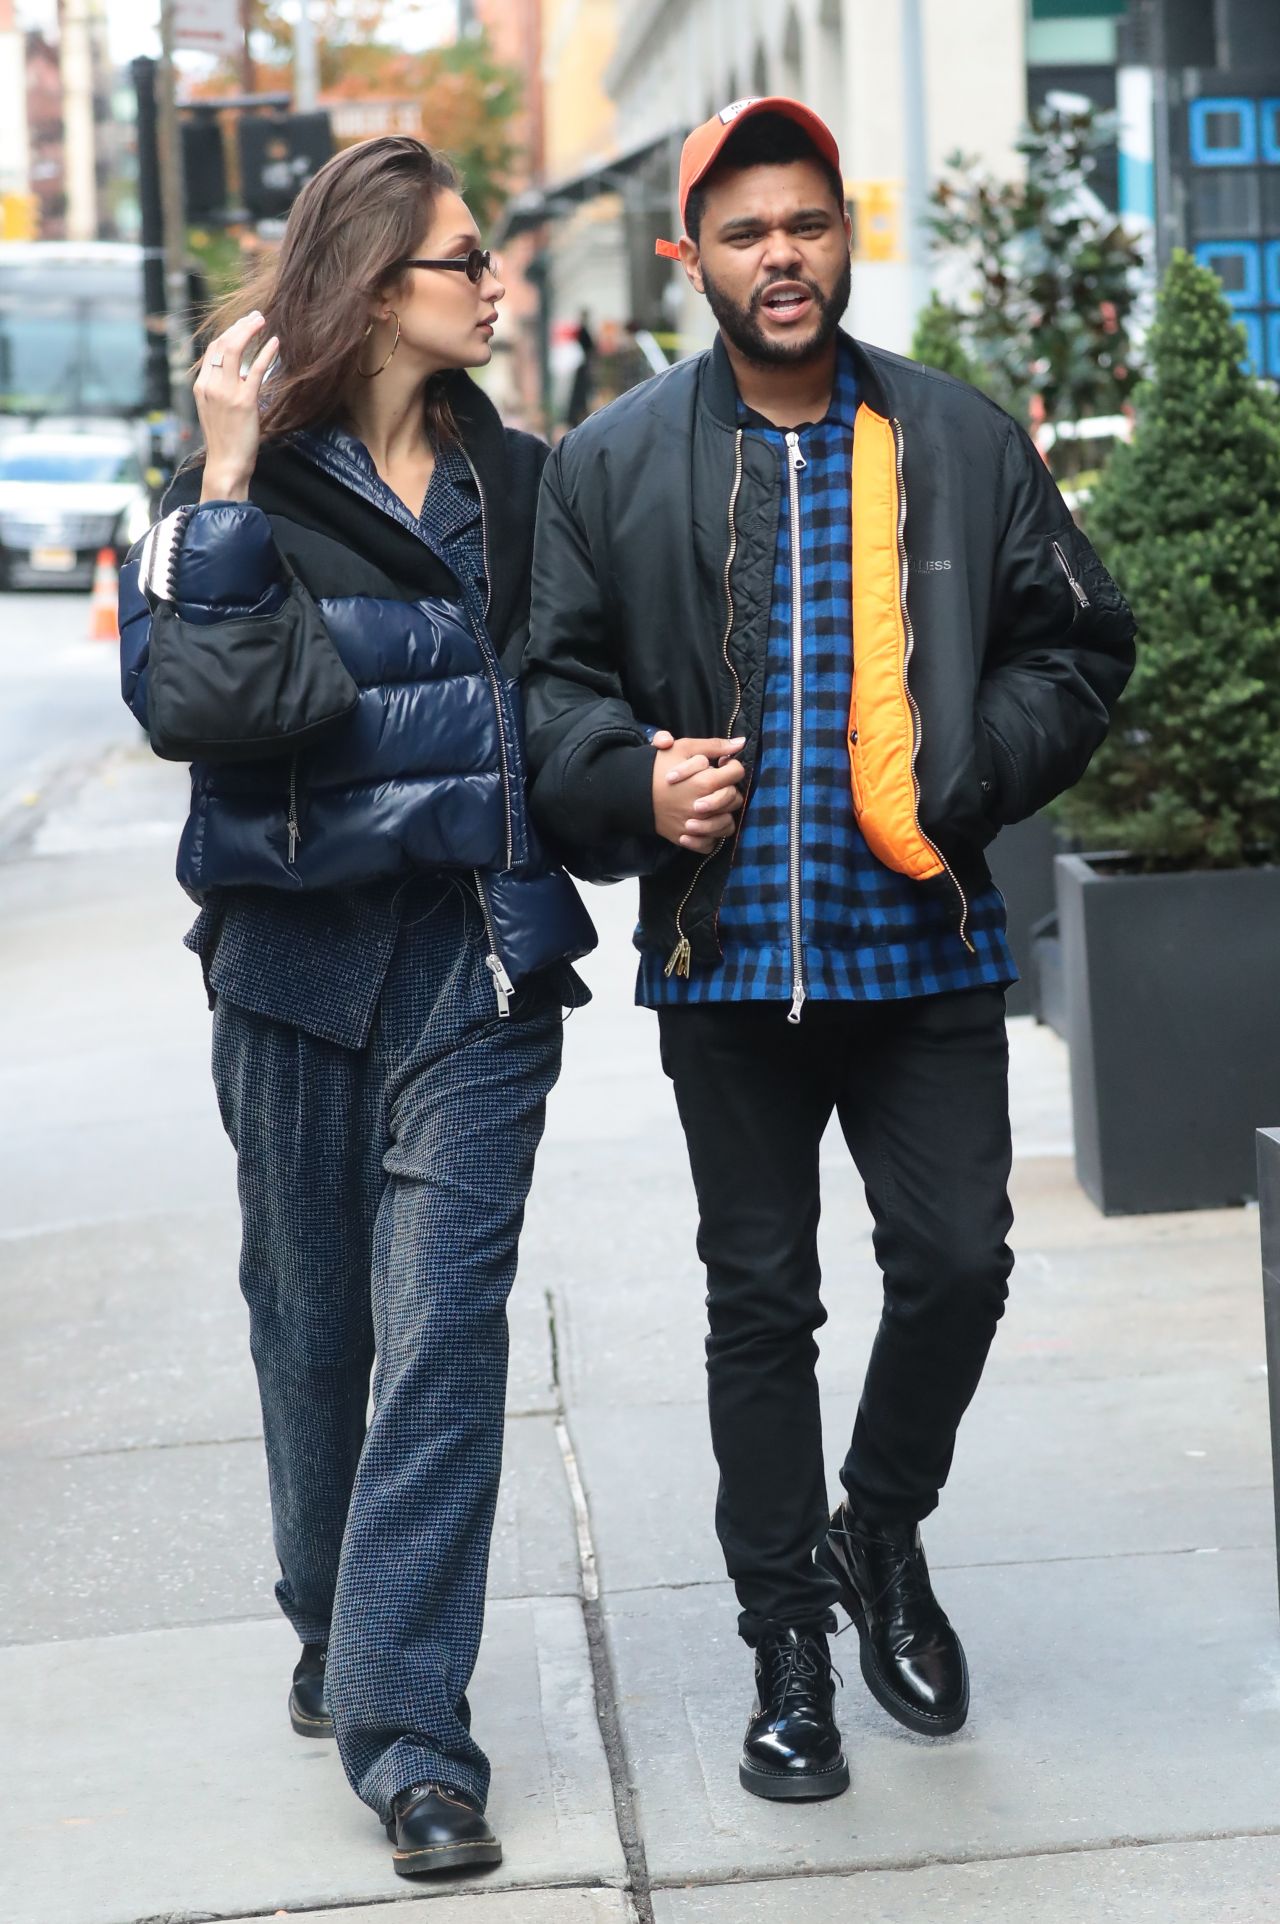 bella-hadid-and-the-weeknd-out-in-new-york-city-10-29-2018-7.jpg